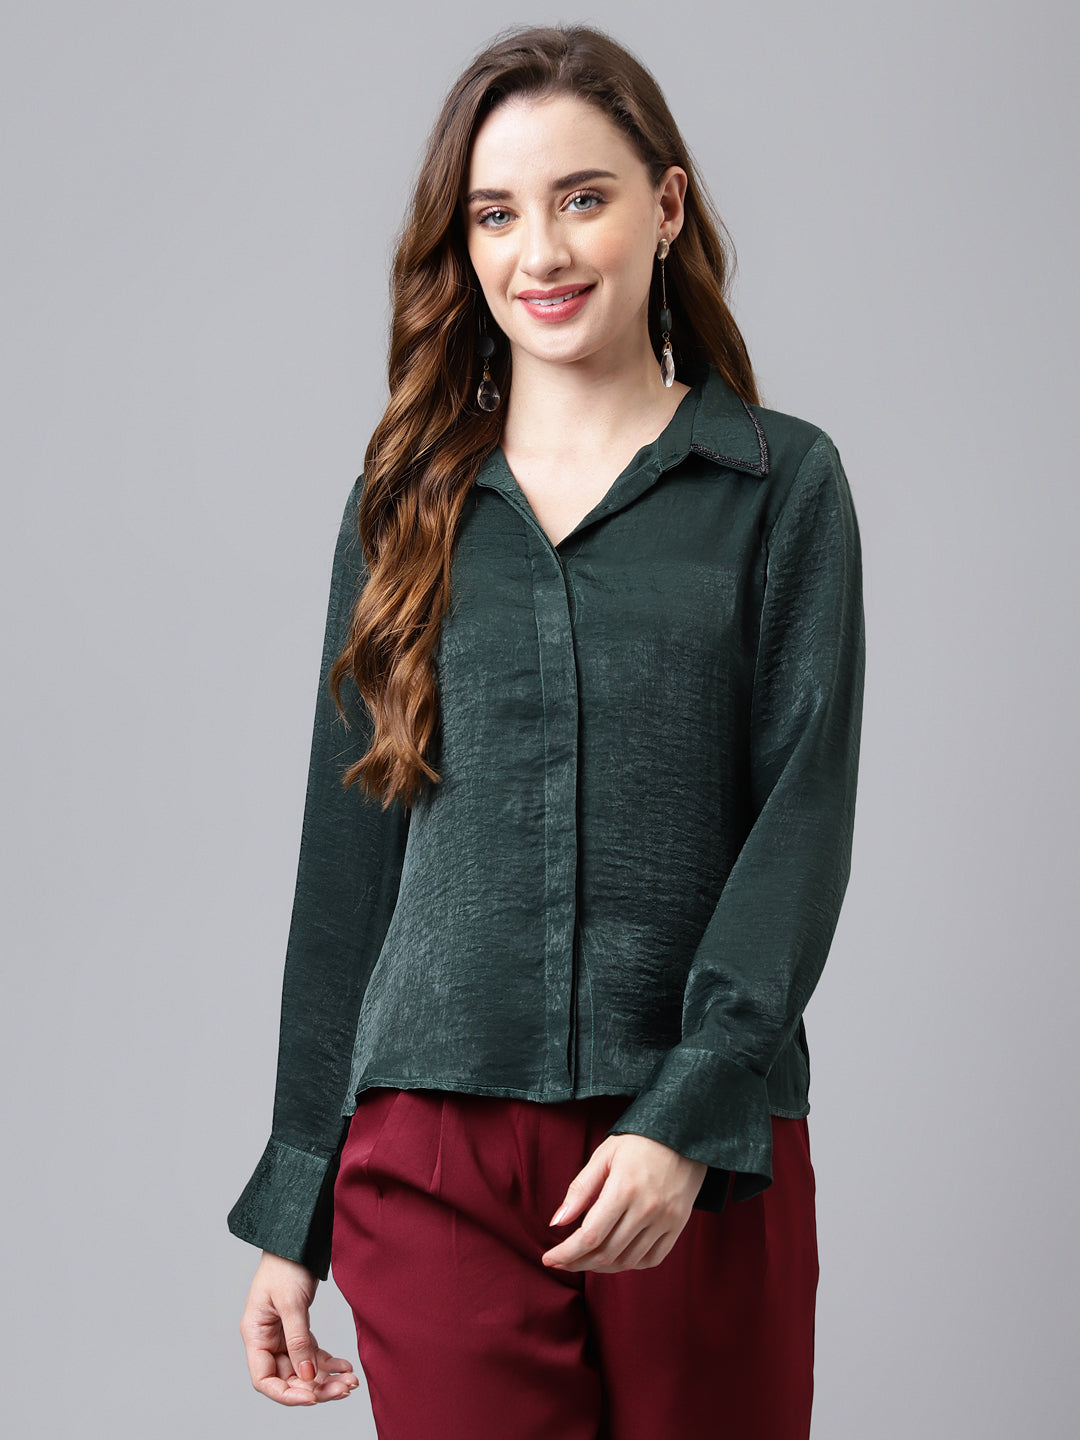 Greenbottle Full Sleeve Collar Neck Solid Women Shirt for Casual